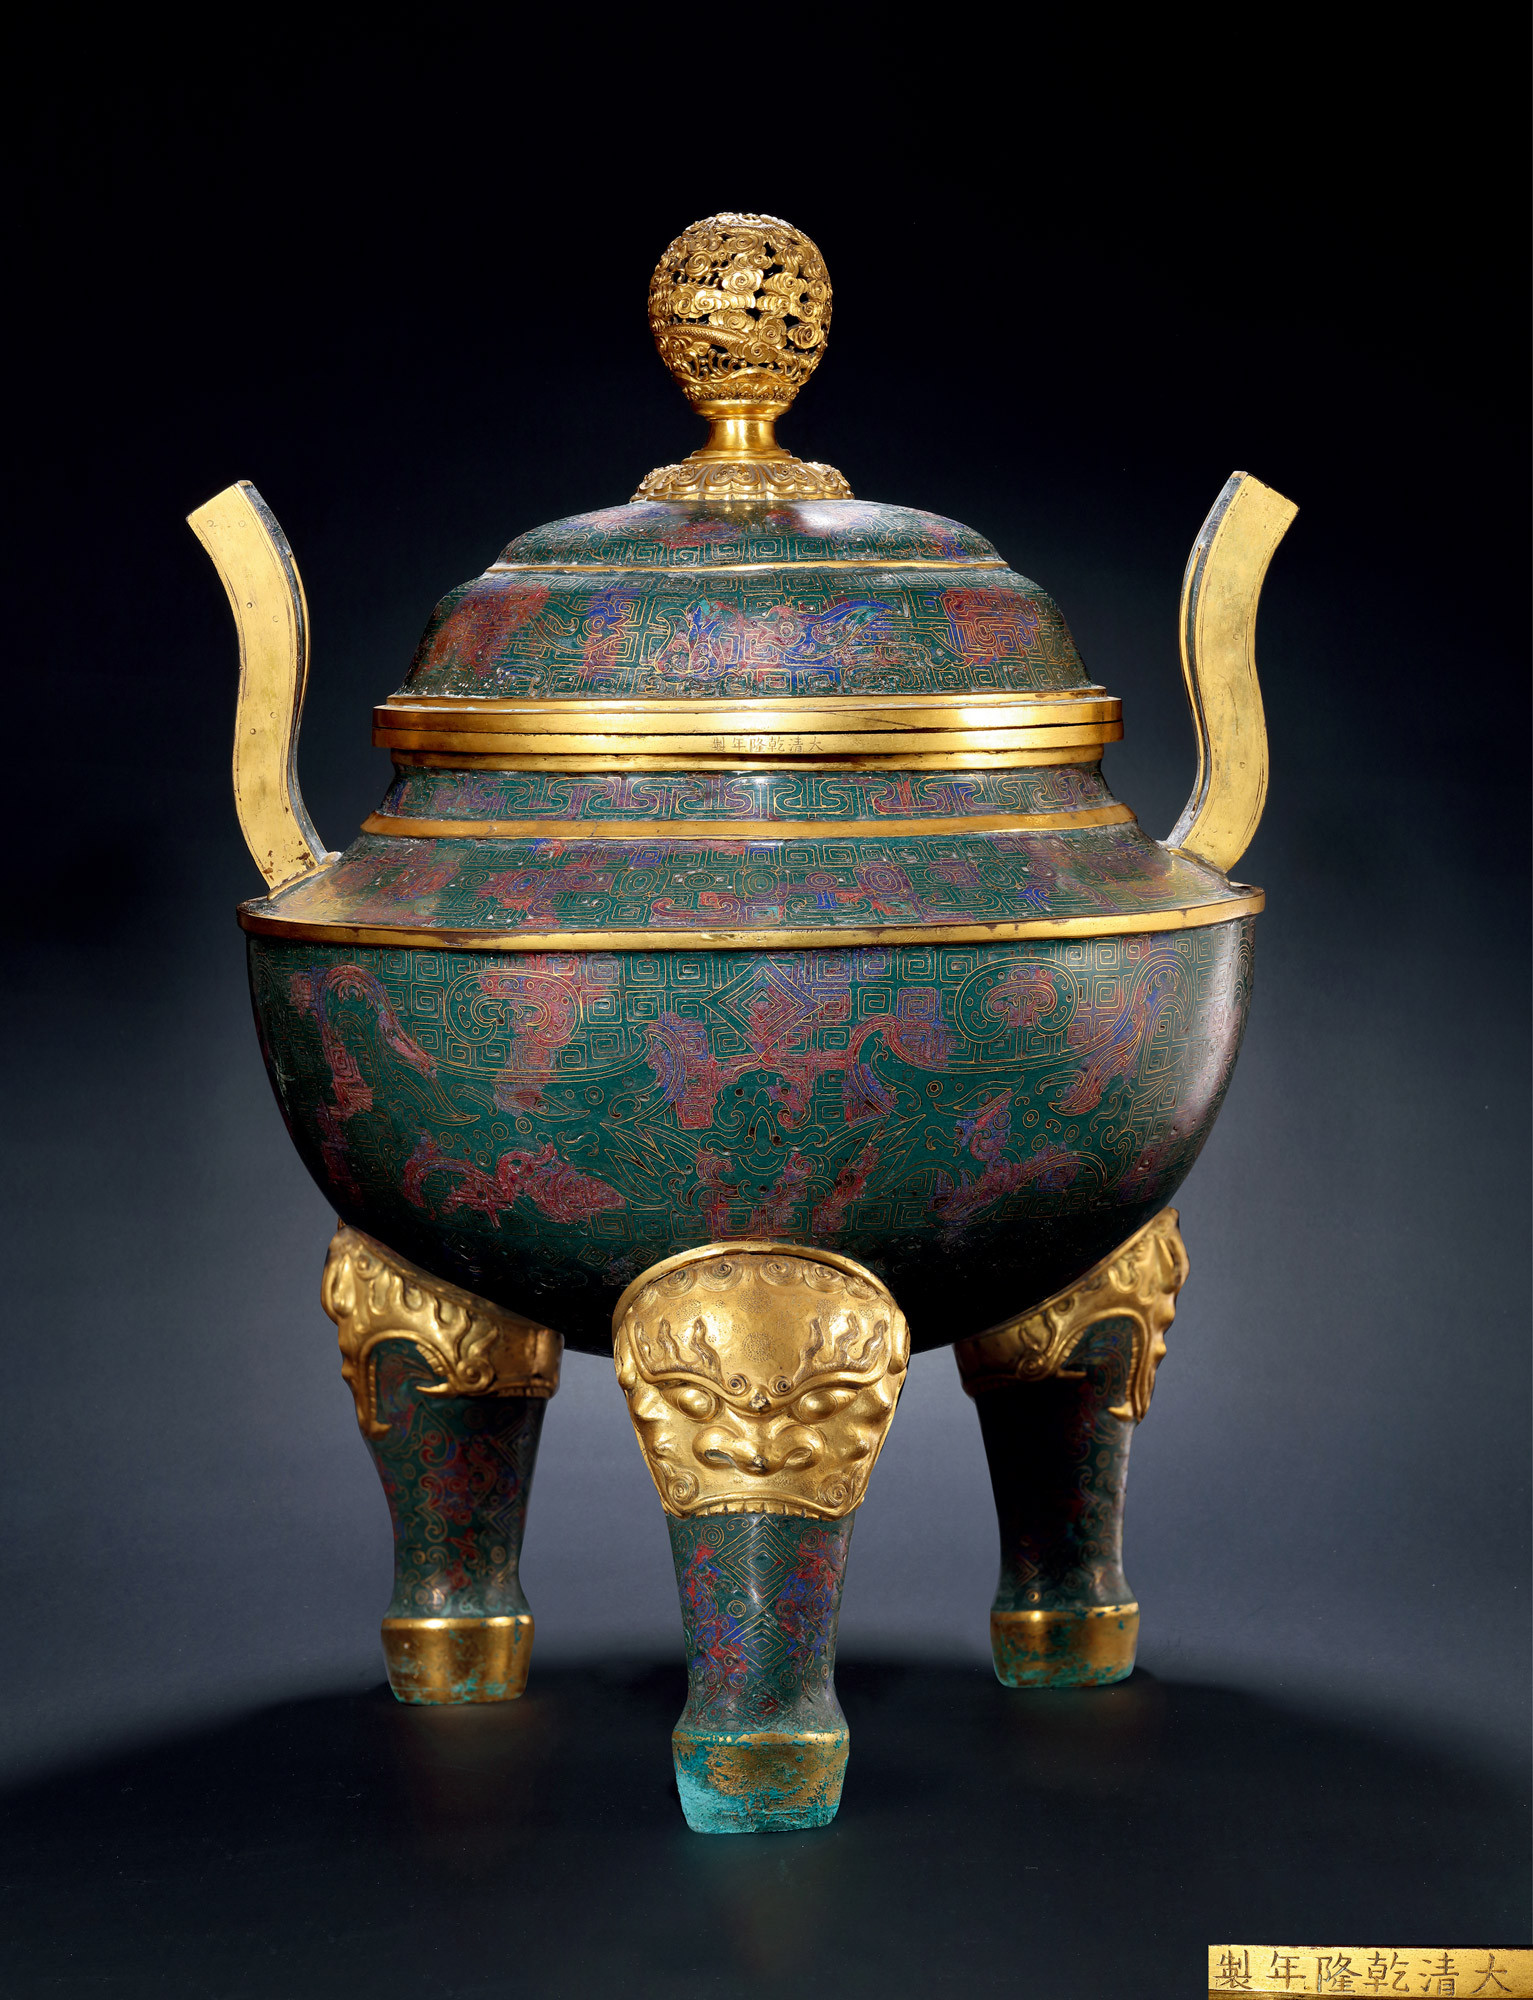 A FINELY AND RARE CLOISONNE ENAMEL DING-FORM CENSER WITH HANDLES